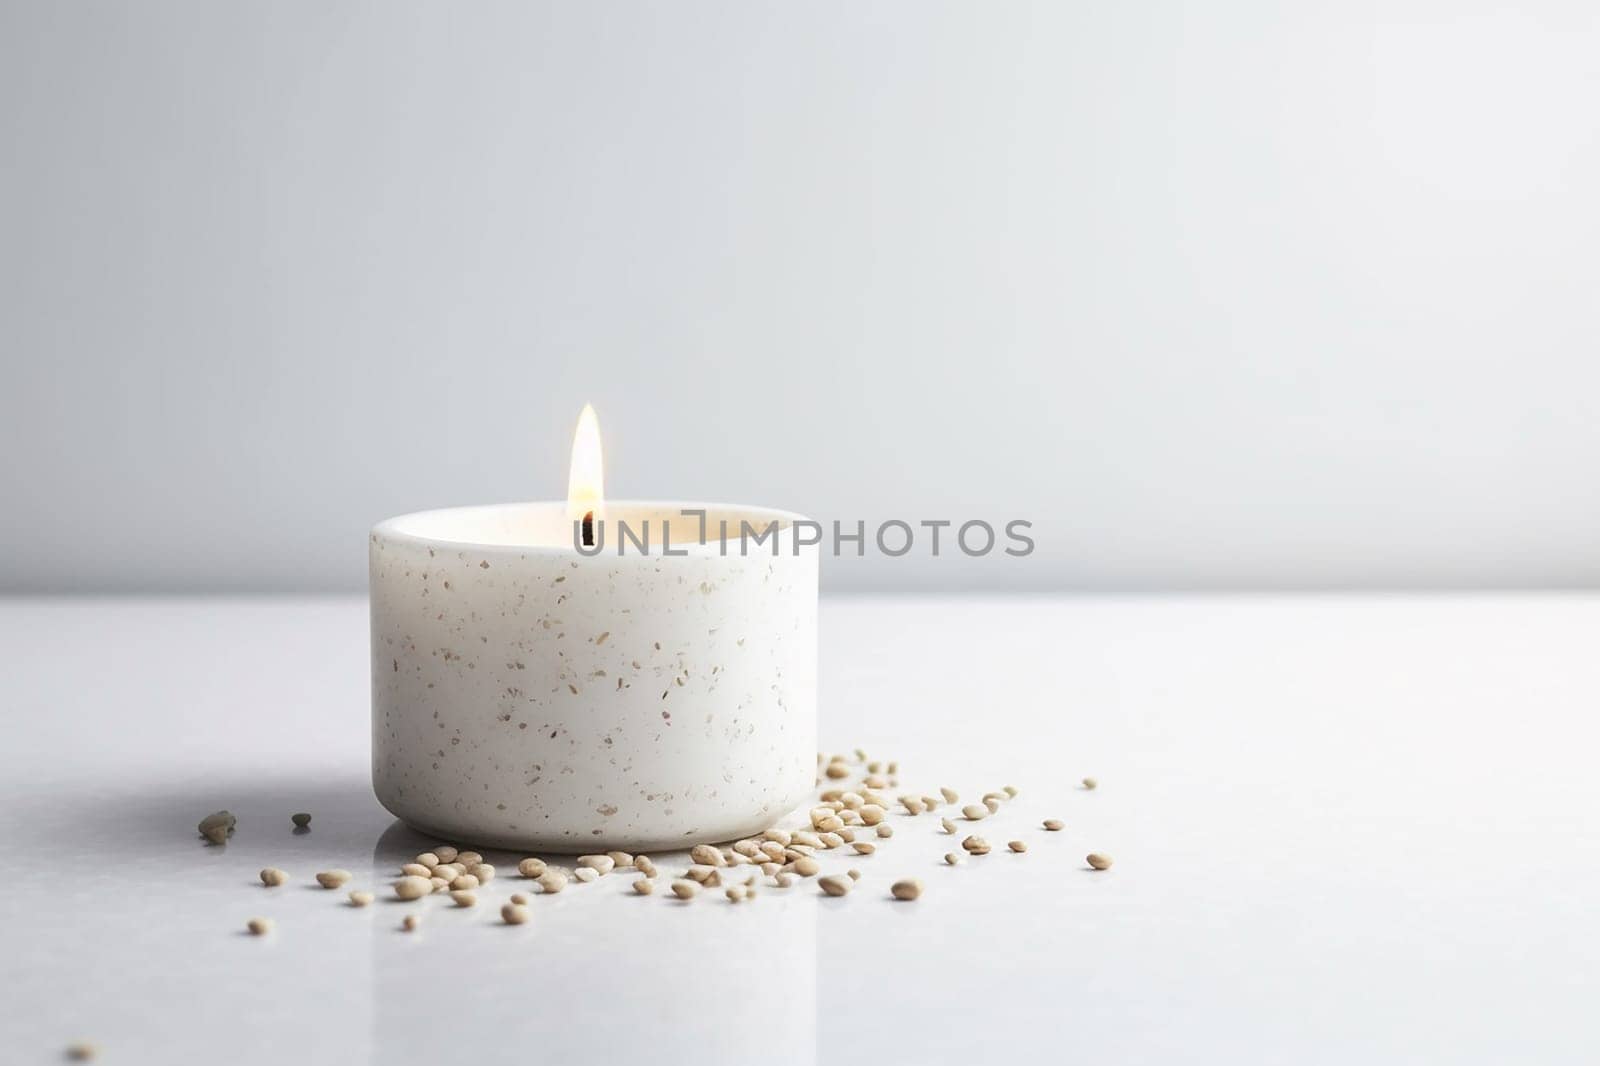 A lit candle in a simple holder surrounded by scattered seeds